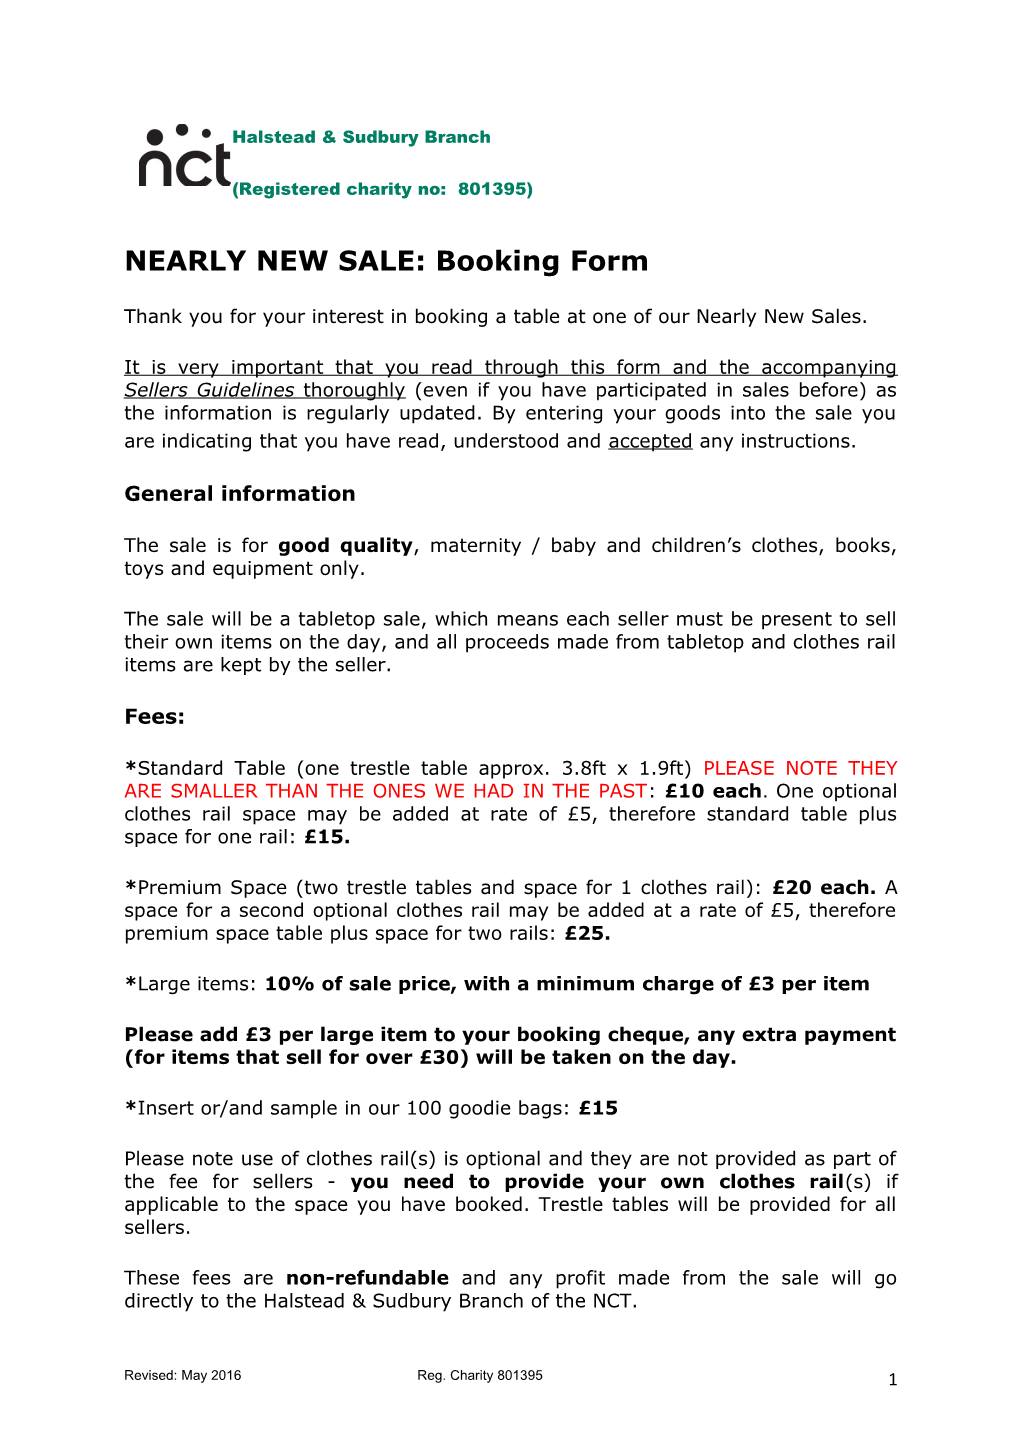 NEARLY NEW SALE: Booking Form